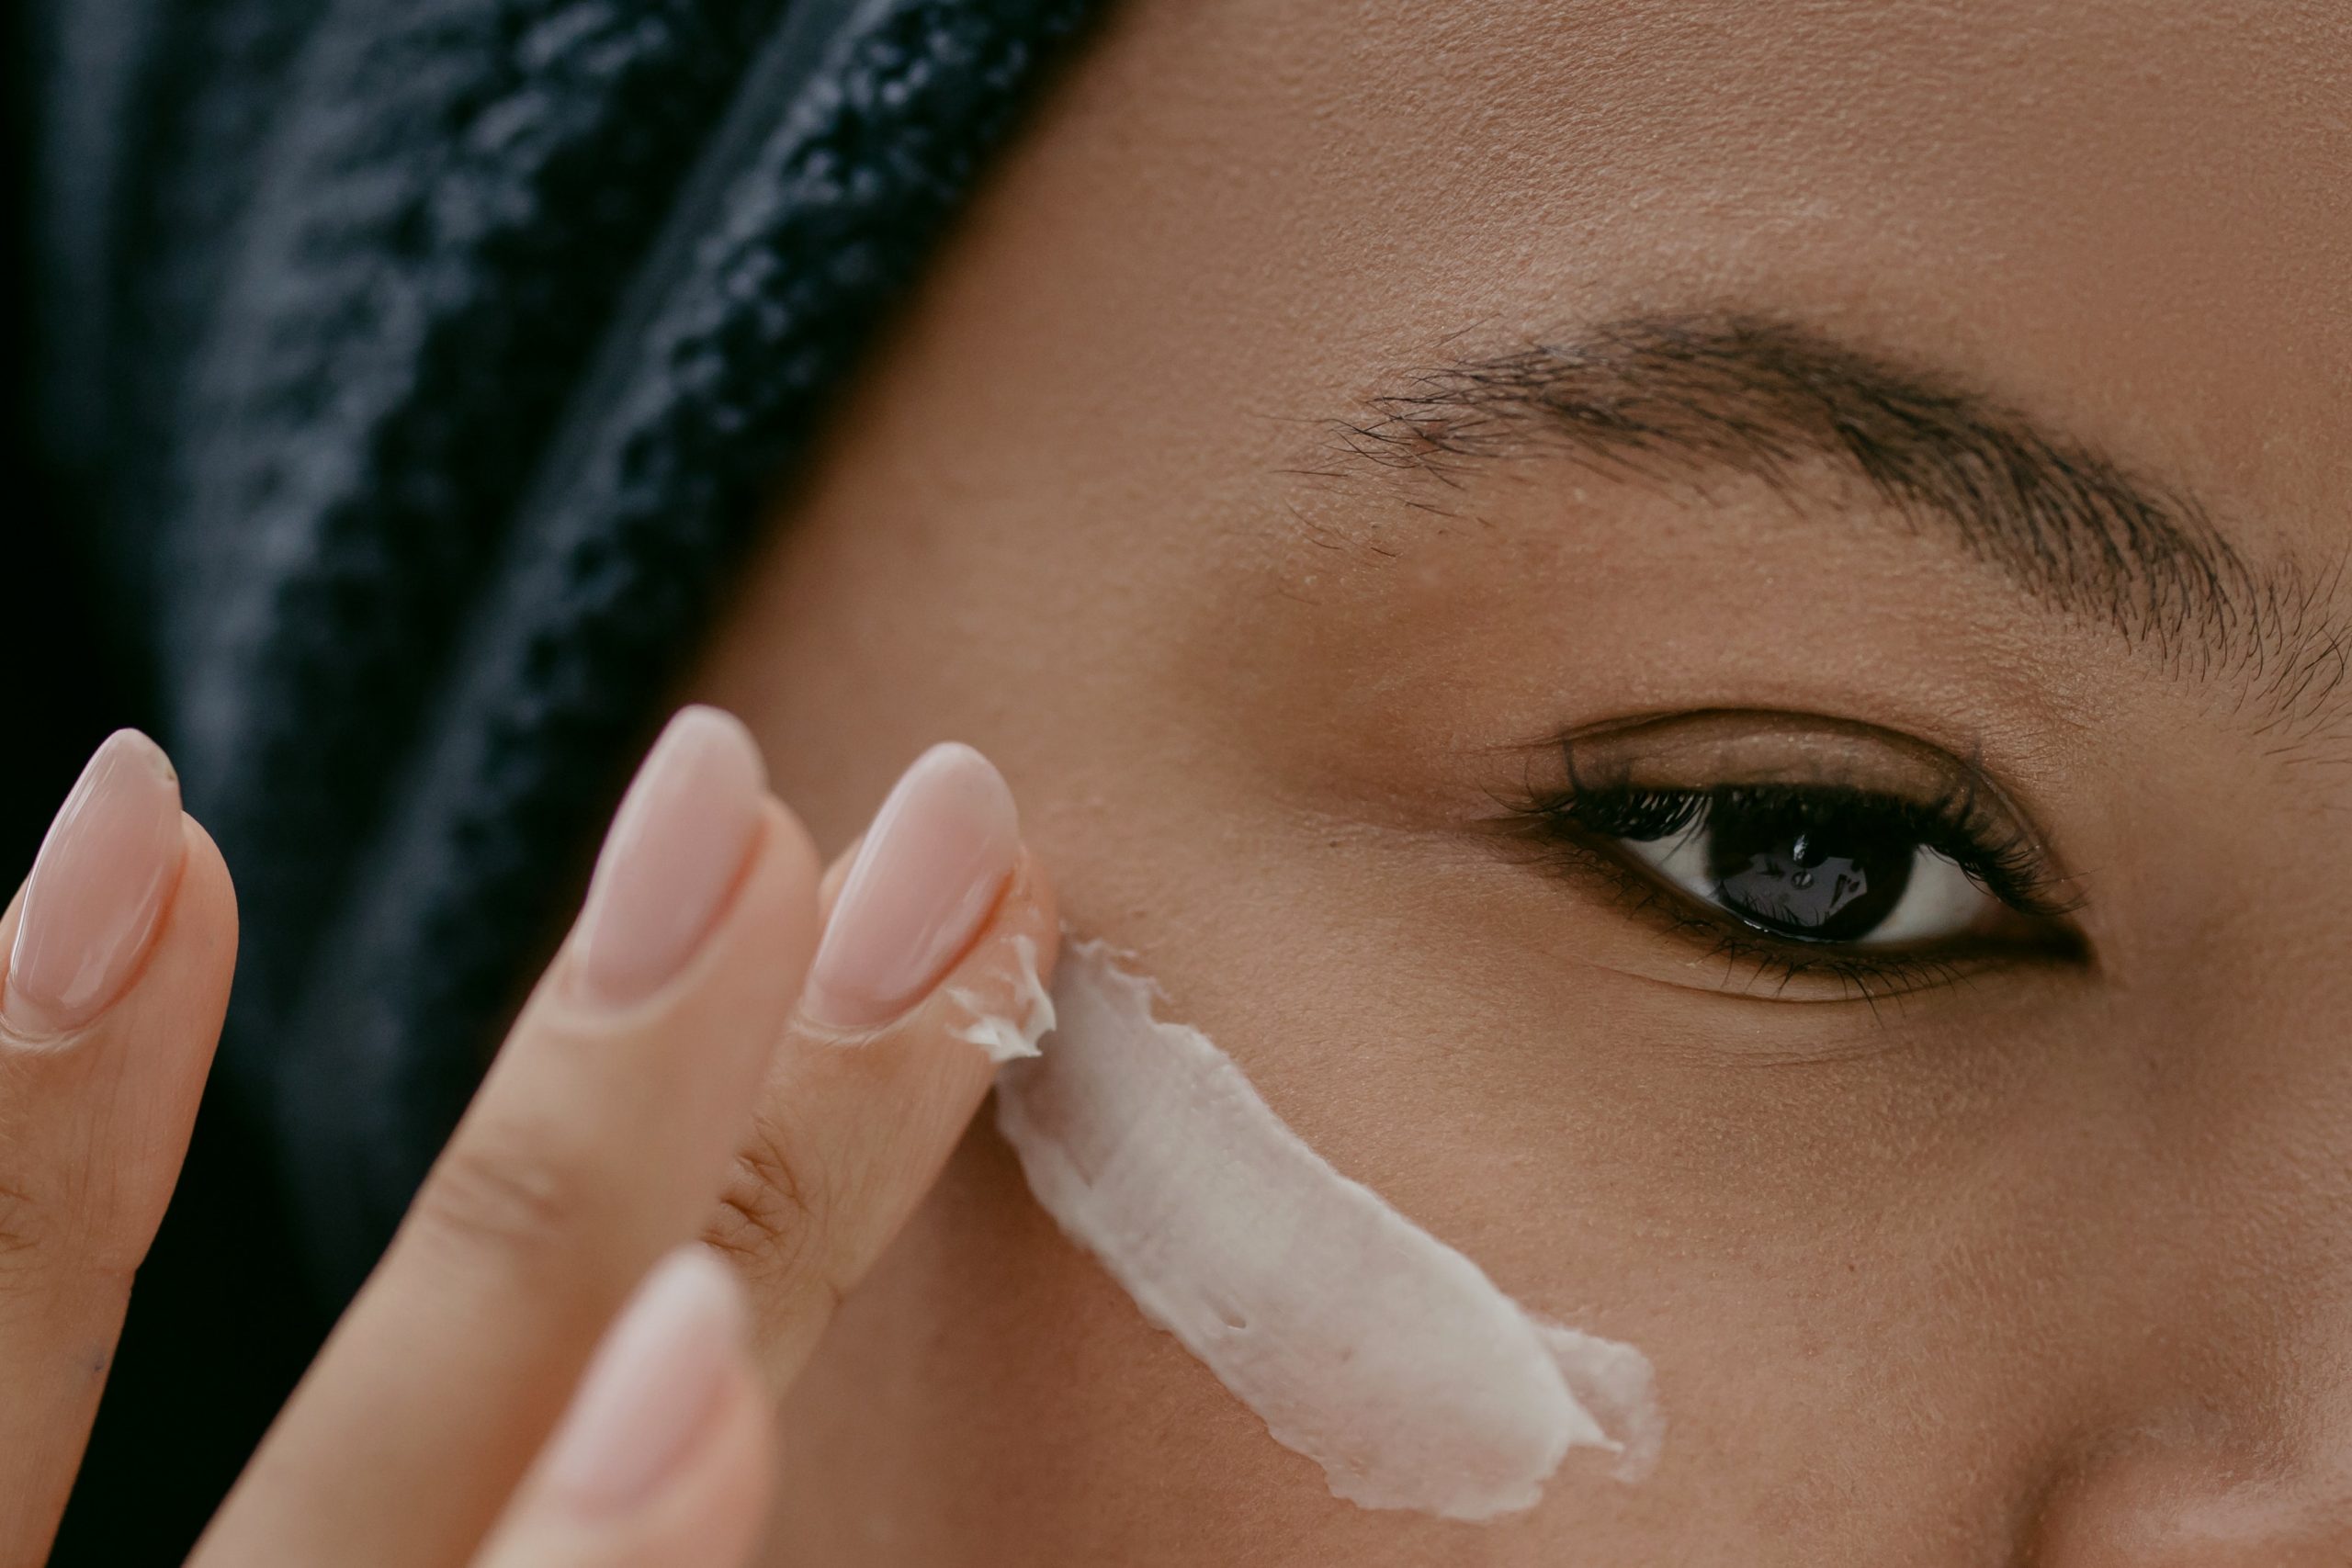 Photo by cottonbro: https://www.pexels.com/photo/woman-applying-facial-cream-on-face-6635929/